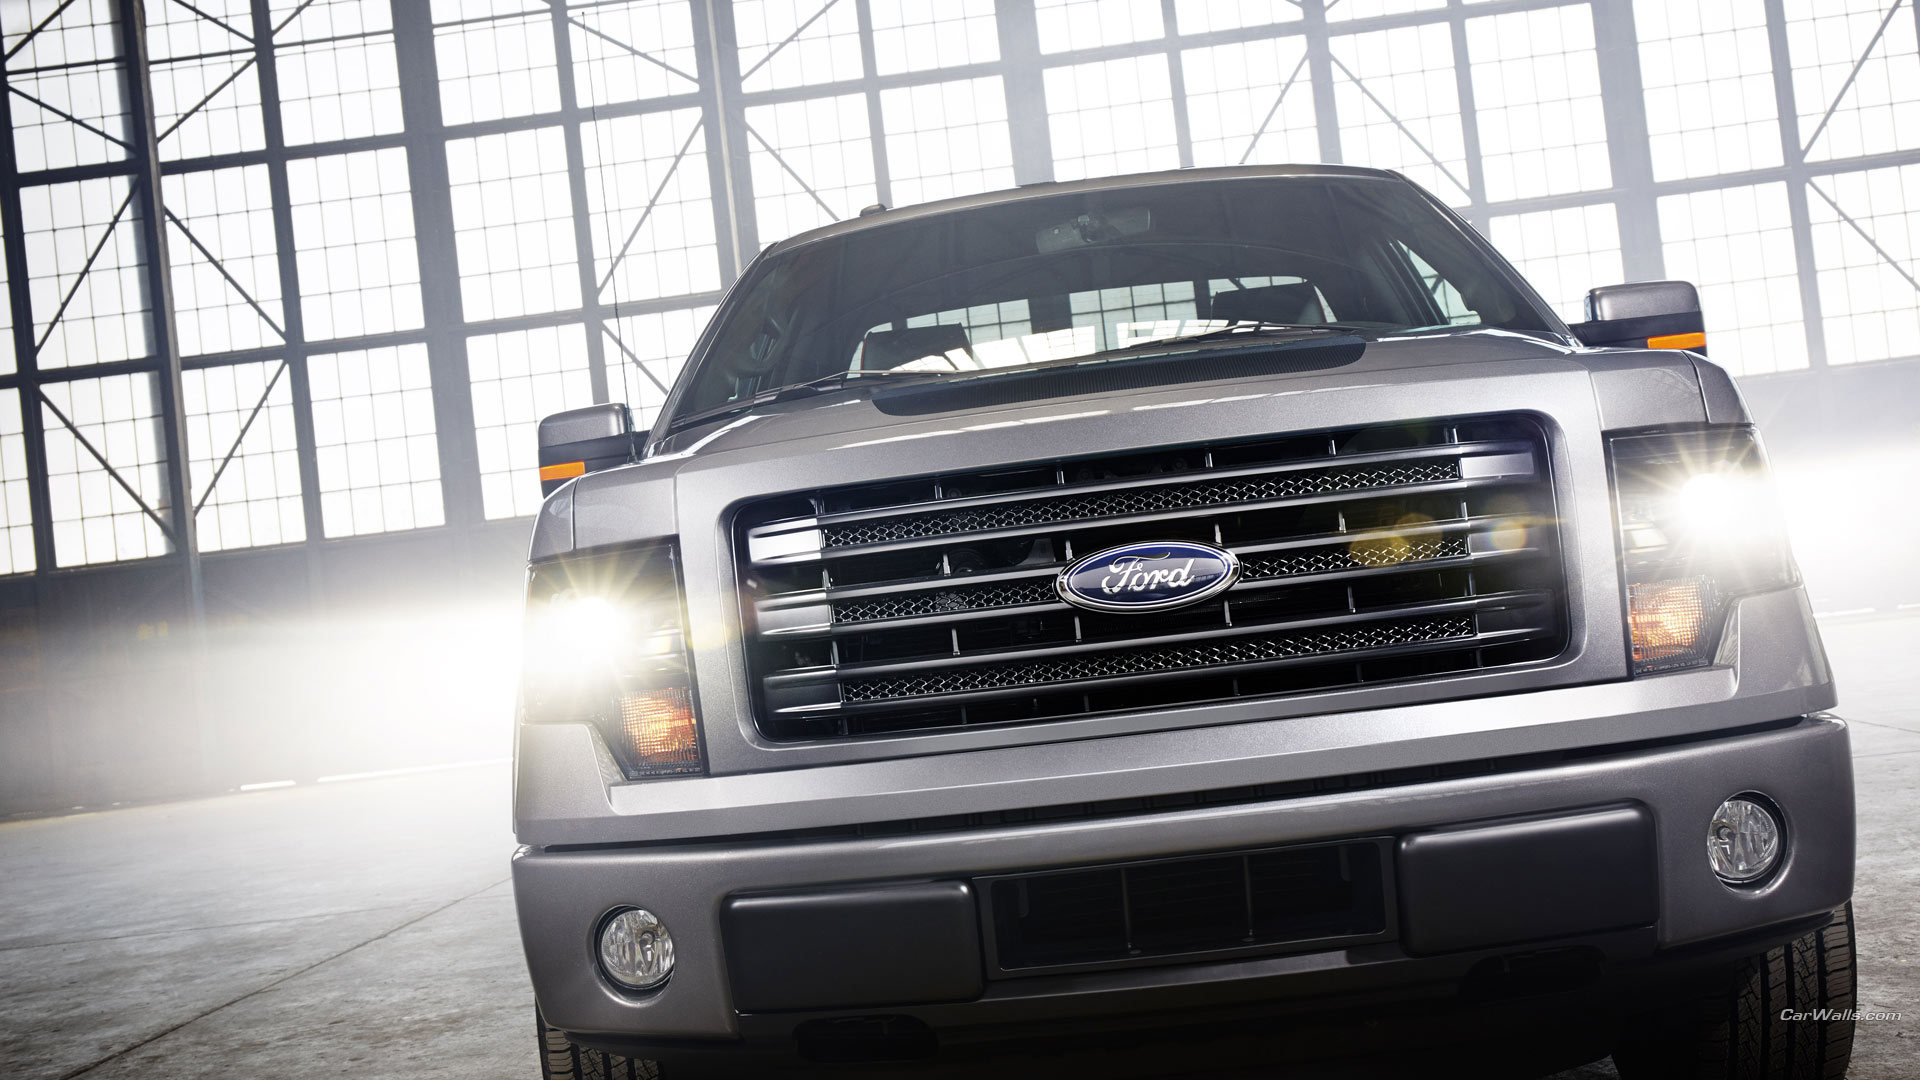 vehicles, 2014 ford f 150 tremor, ford